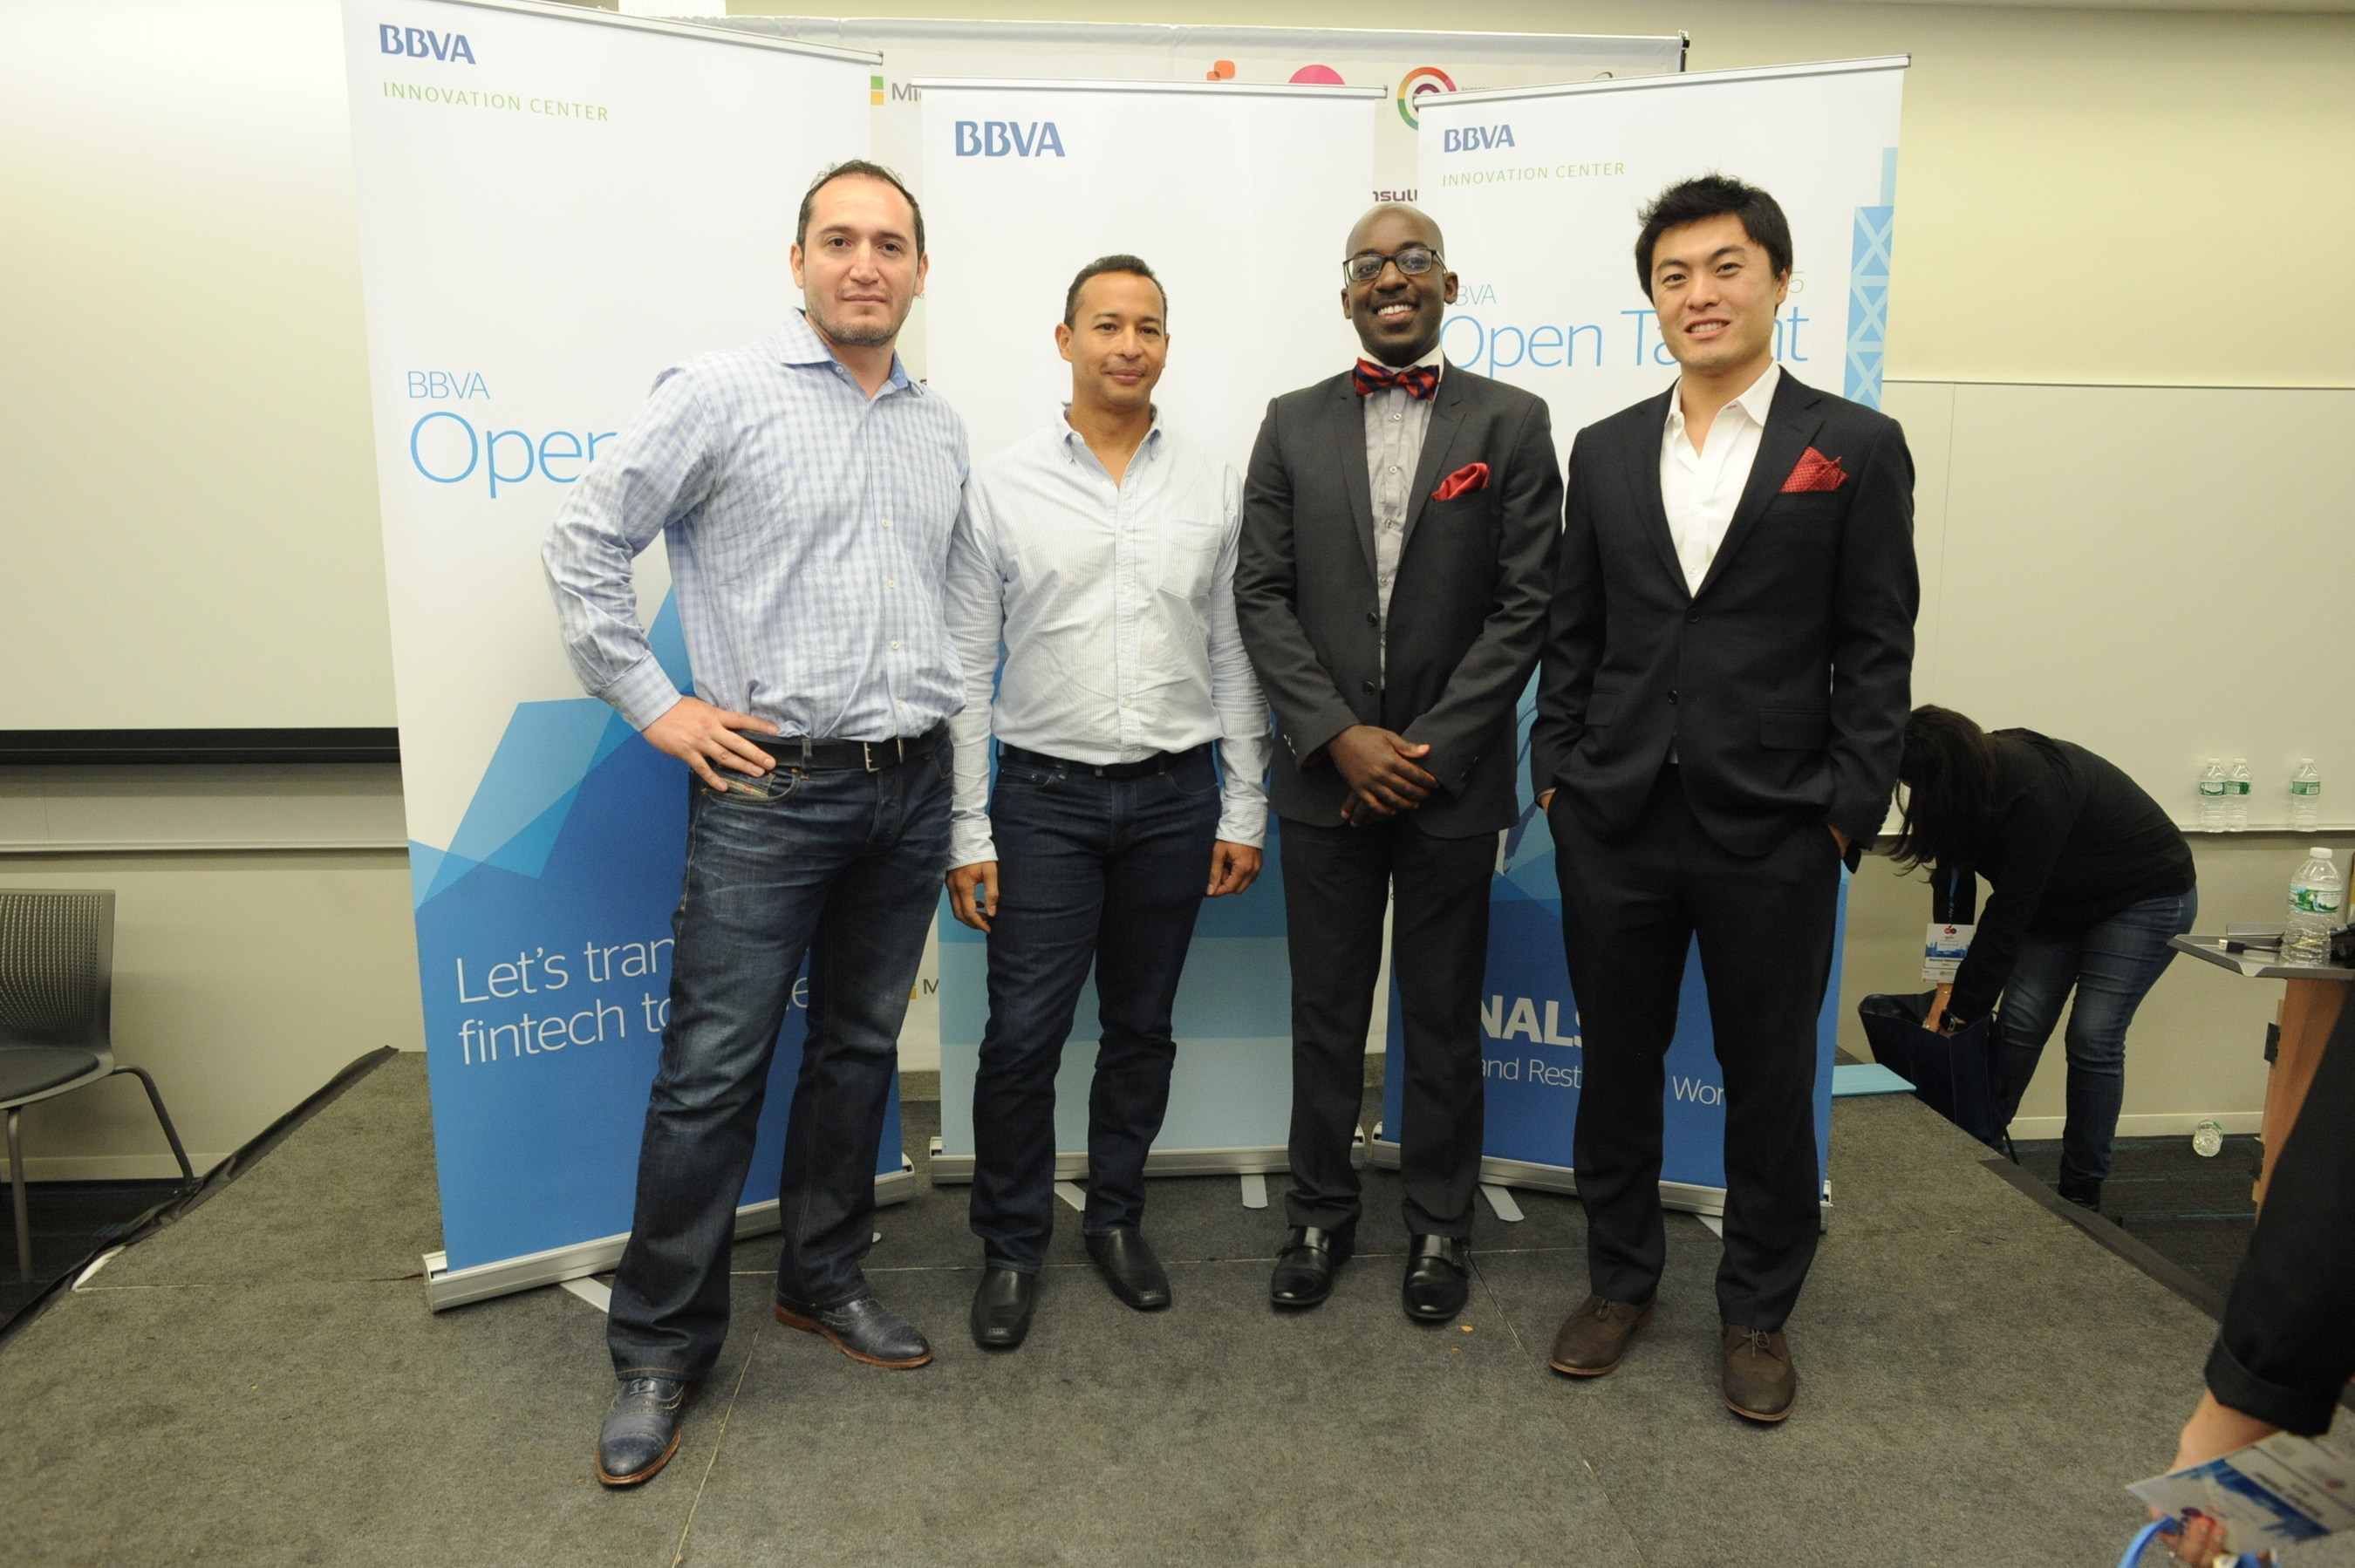 (l-r) LendingFront CEO and co-founder Jorge Sun, LendingFront CTO and co-founder Dario Vergara, ModernLend co-founder Kobina Ansah, ModernLend co-founder Shuo Zhang